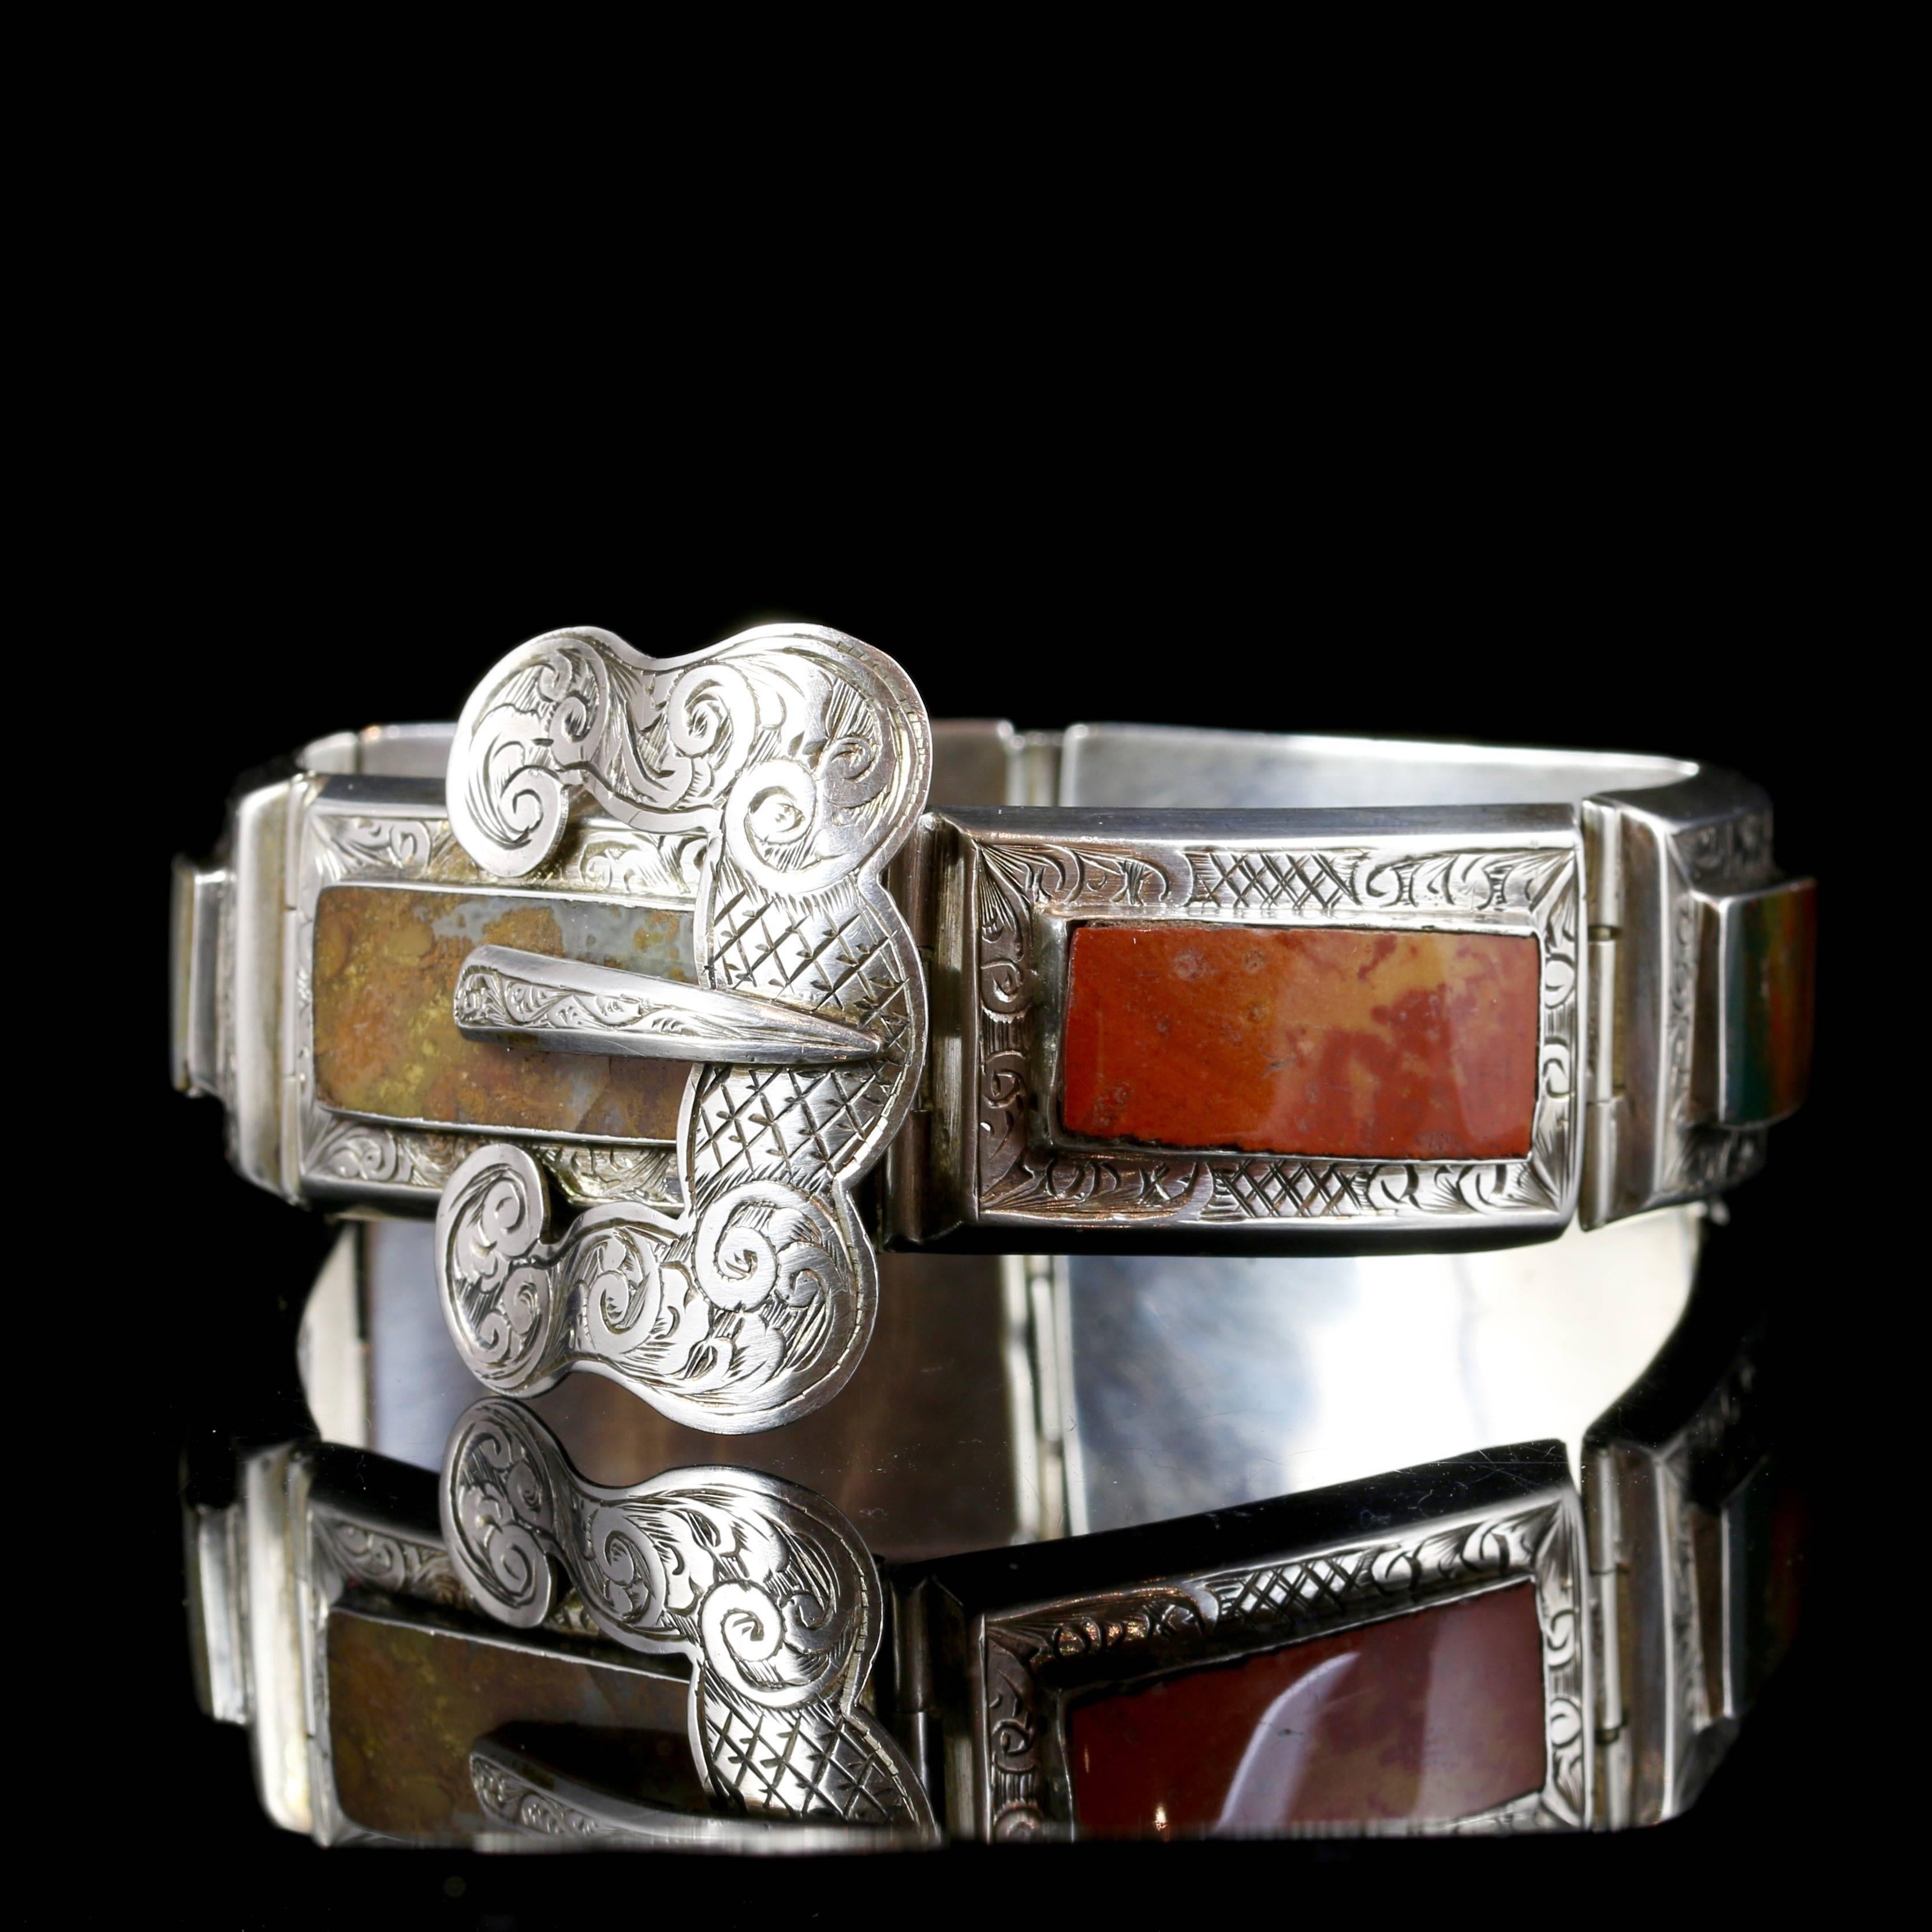 This is a fabulous Sterling silver Scottish Agate bracelet, Circa 1860. 

Set with lots of lovely natural agates in an abstract finish, chased with intricate engraving around each agate.

Scottish Jewellery was made popular by Queen Victoria as it